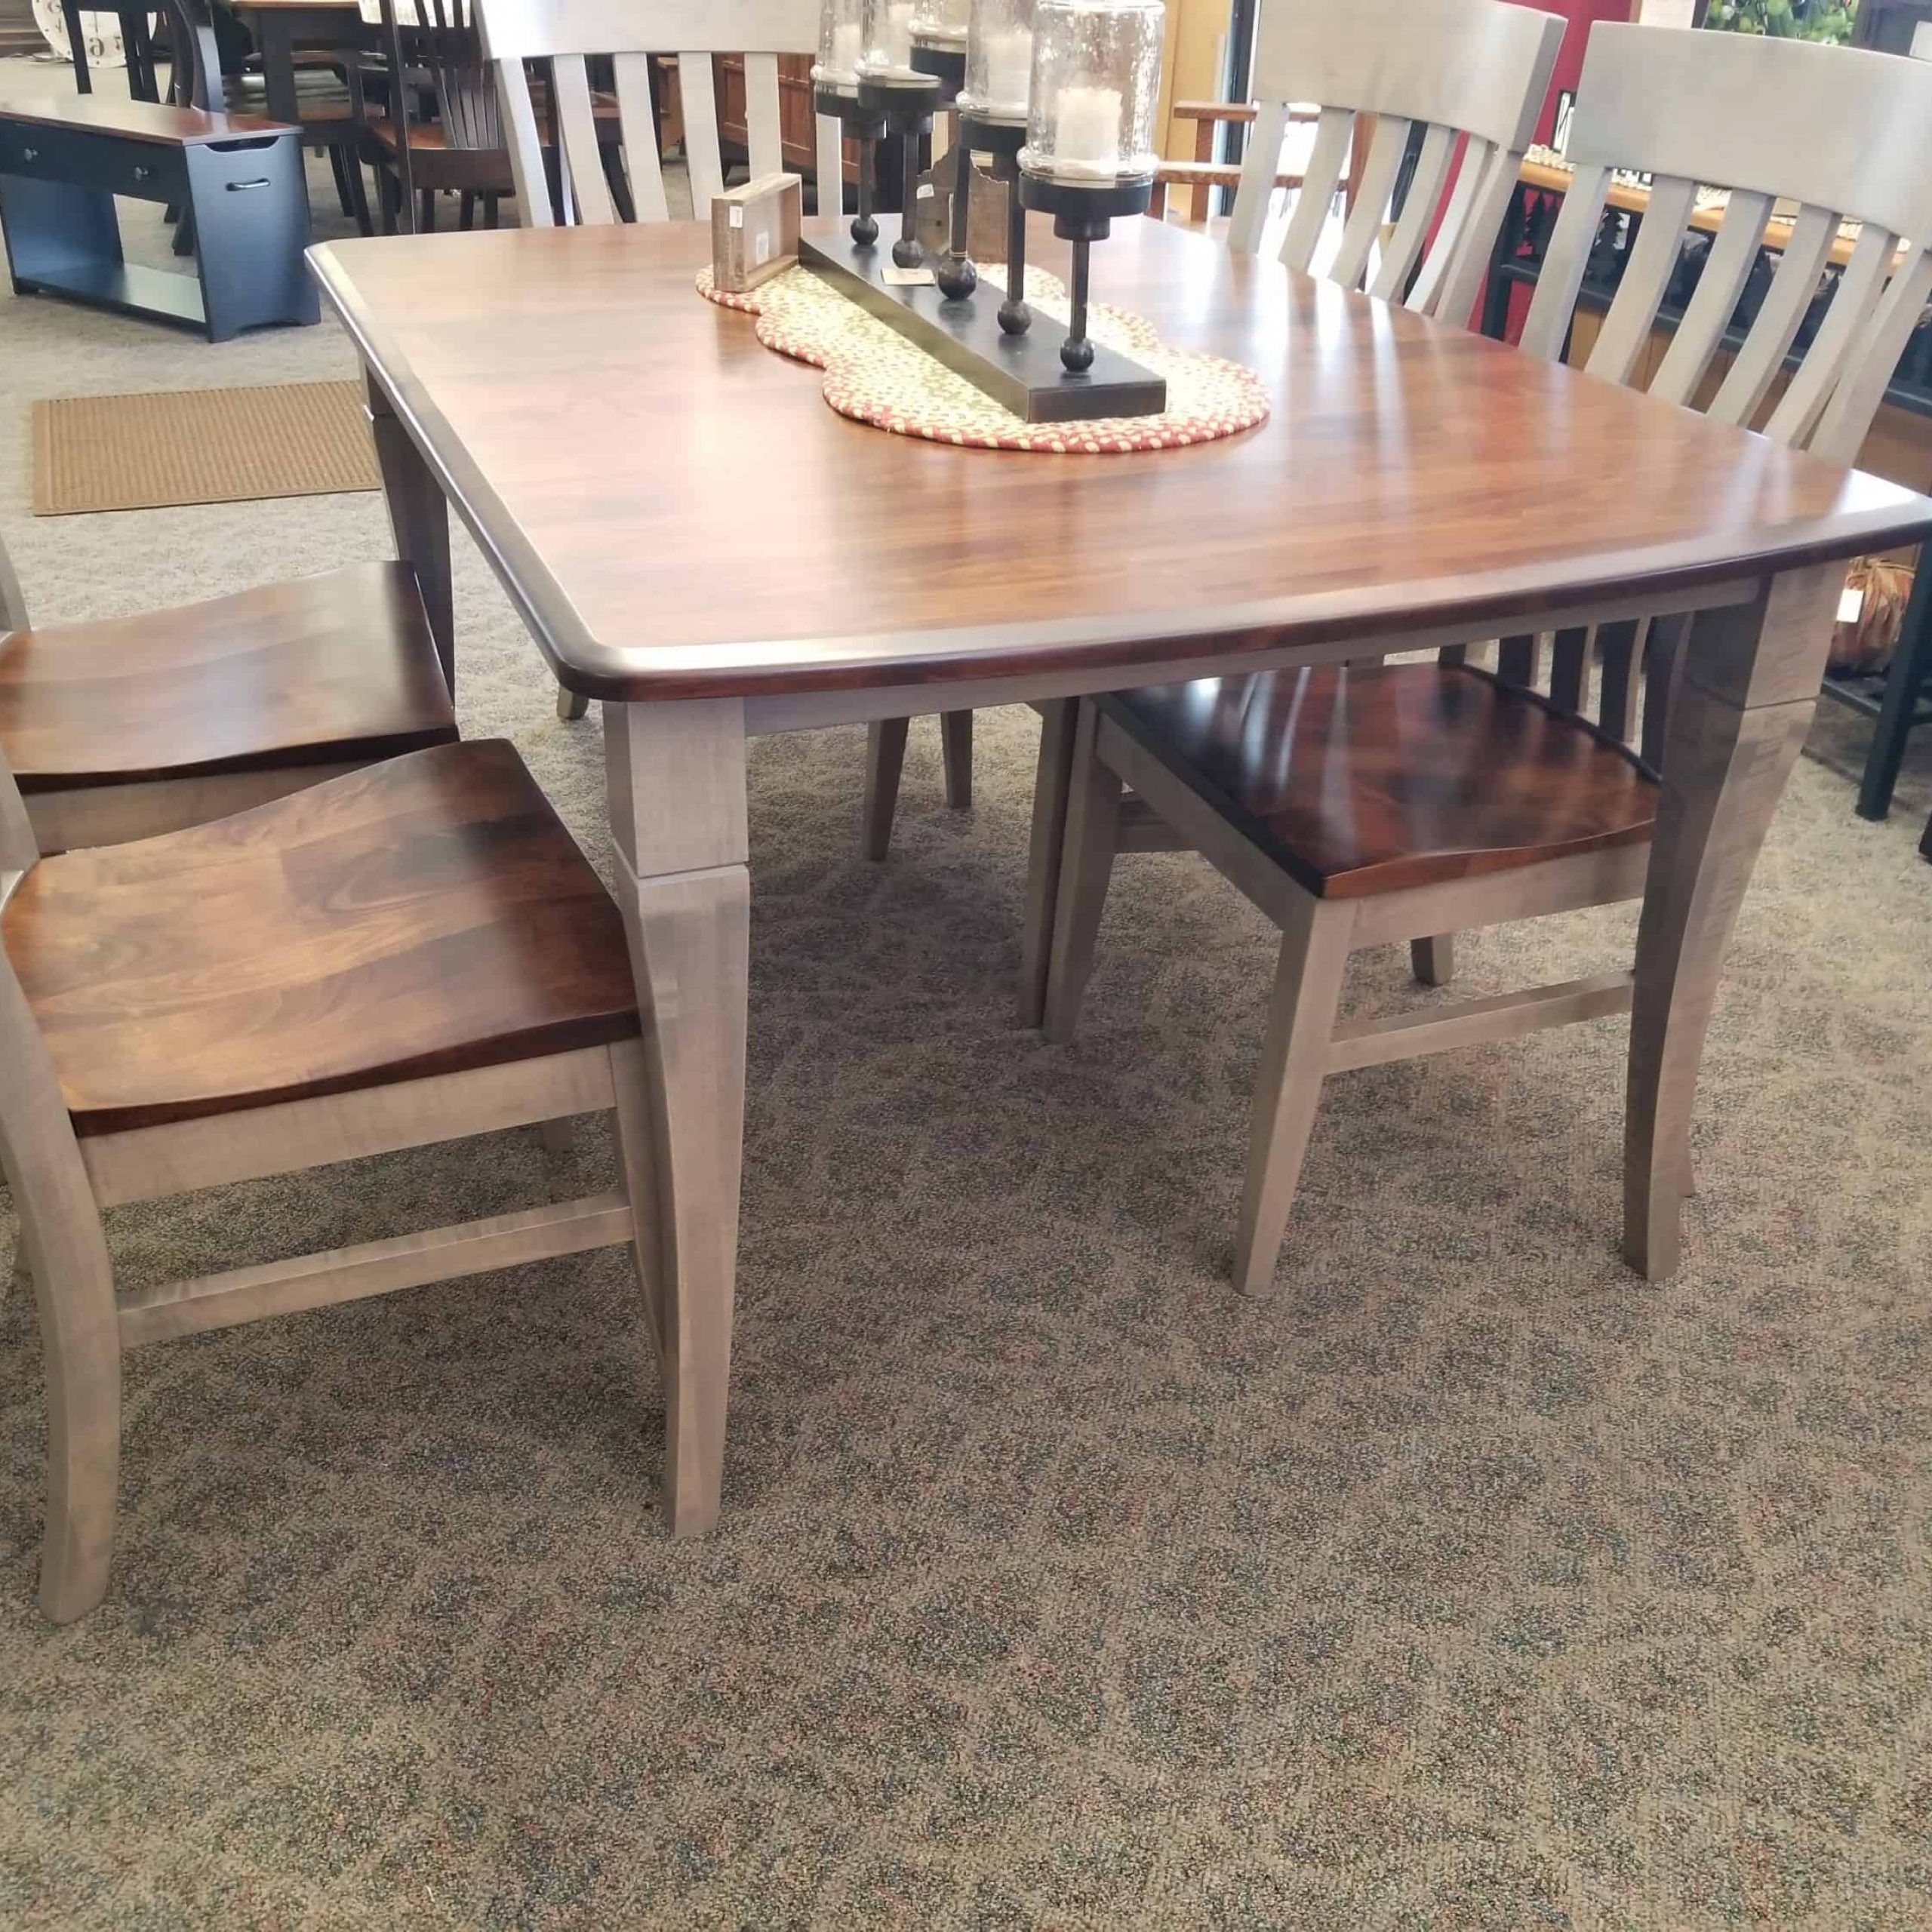 Famous Newbury Dining Table, Shown In Brown Maple – Amish Oak With Brown Dining Tables (View 17 of 20)